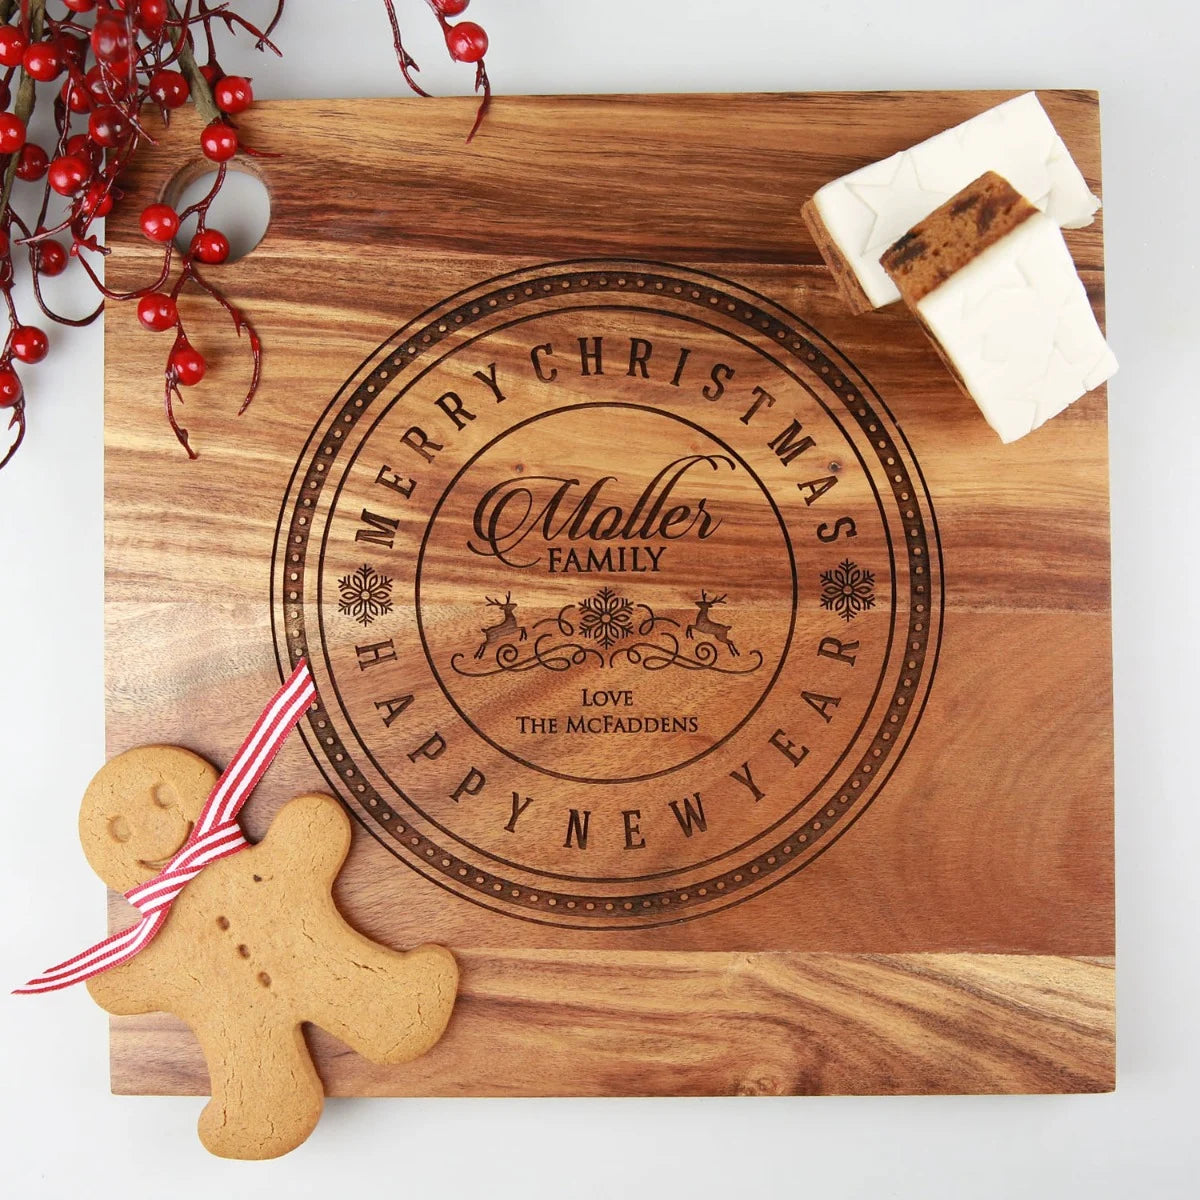 engraved wooden cheese board